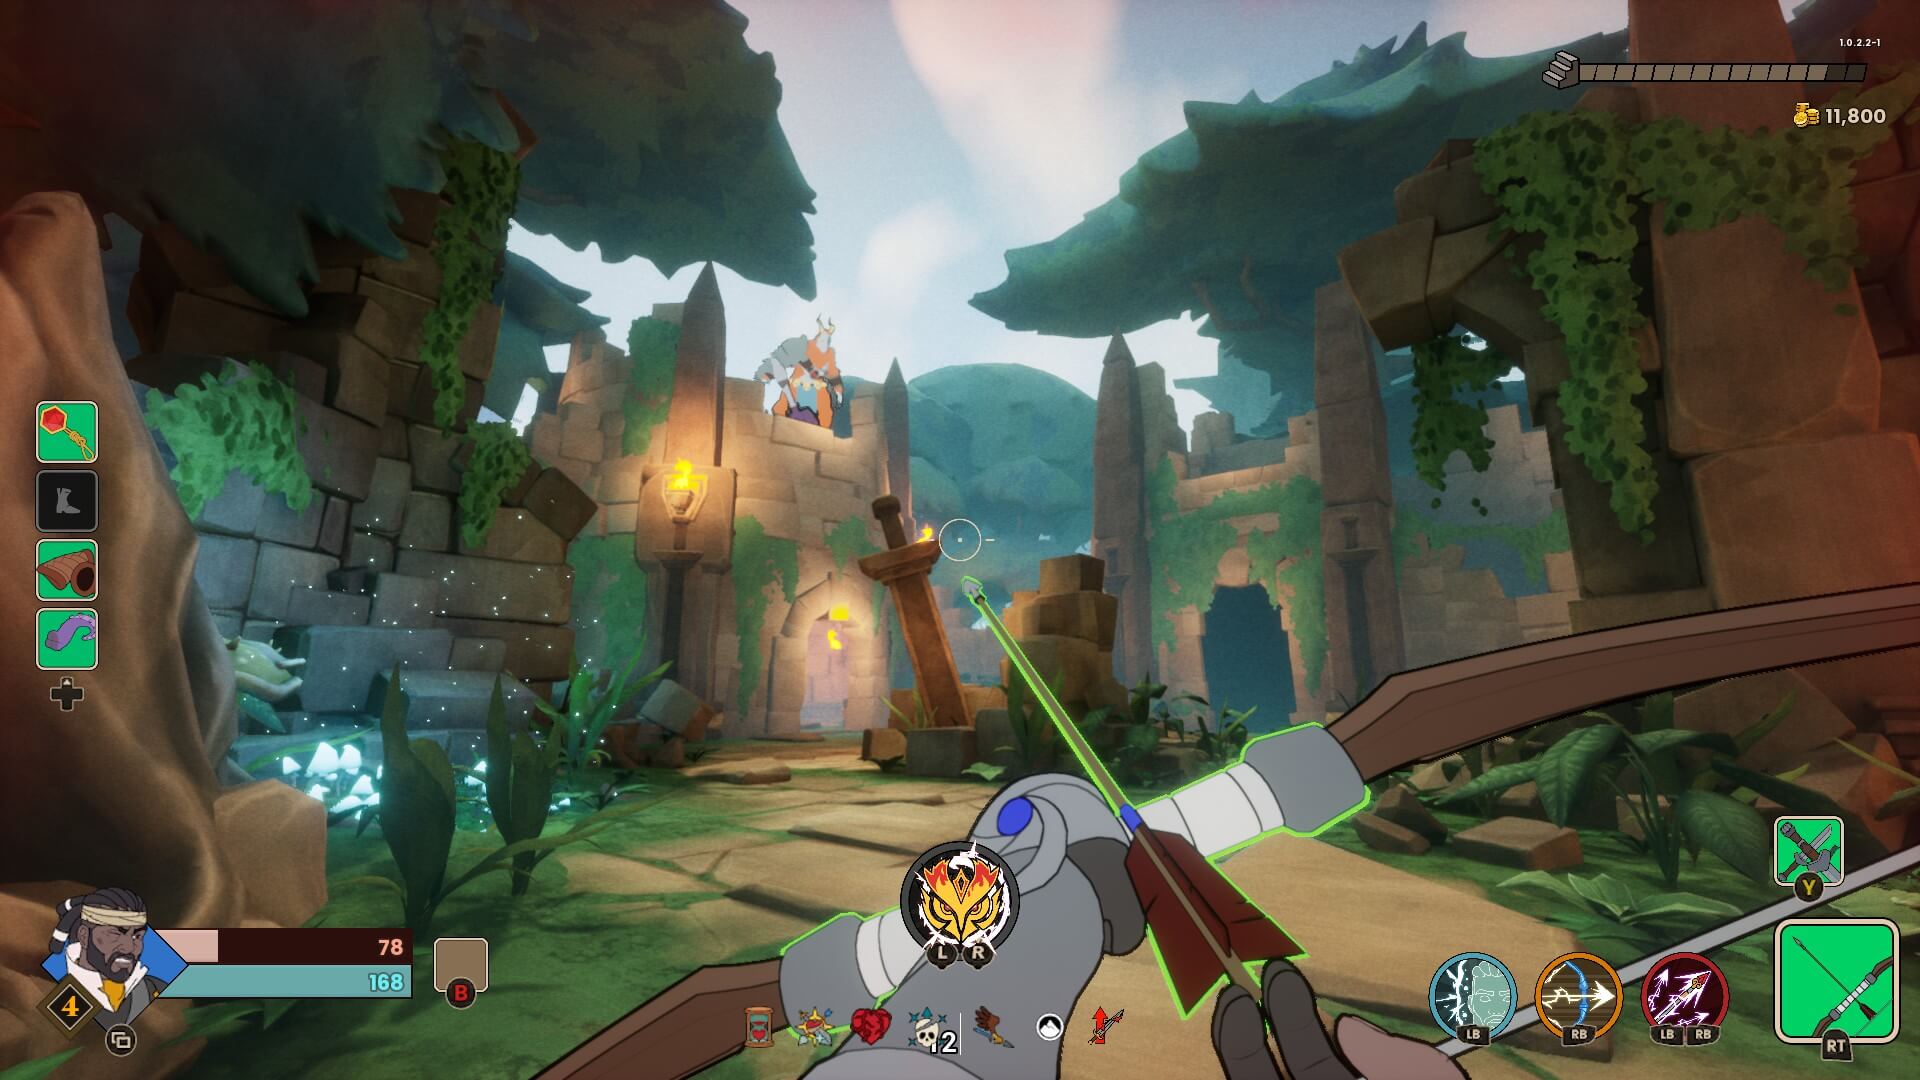 A clearing with ruins surrounded by trees. A giant character stands on the ruins while in the foreground is a bow and arrow being held by your character